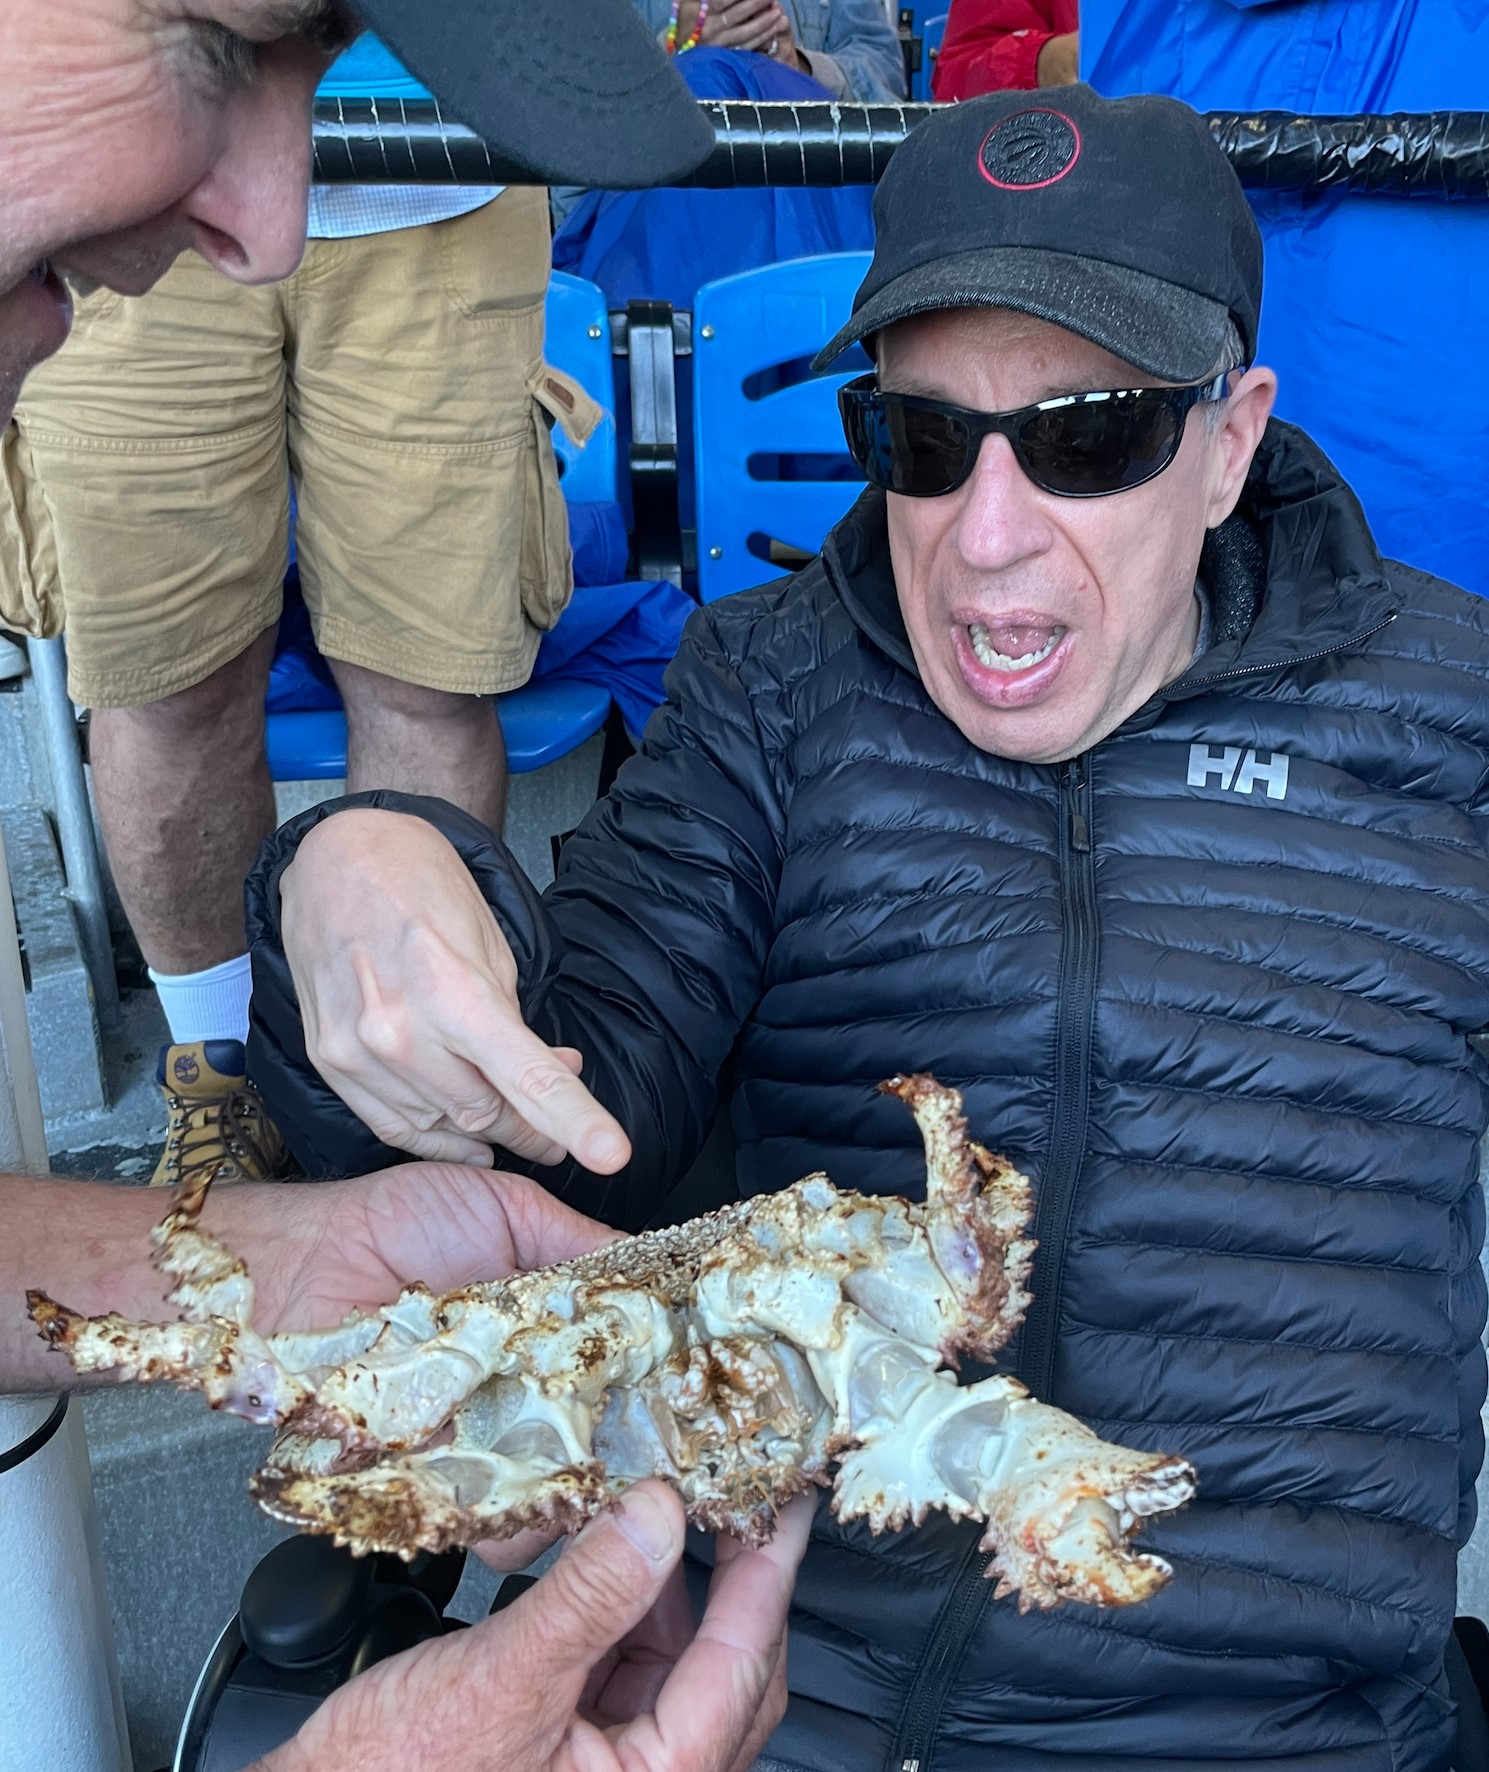 David, in a jacket, baseball cap, and sunglasses, looking shocked and pointing at a giant crab that someone off camera is holding out to him.